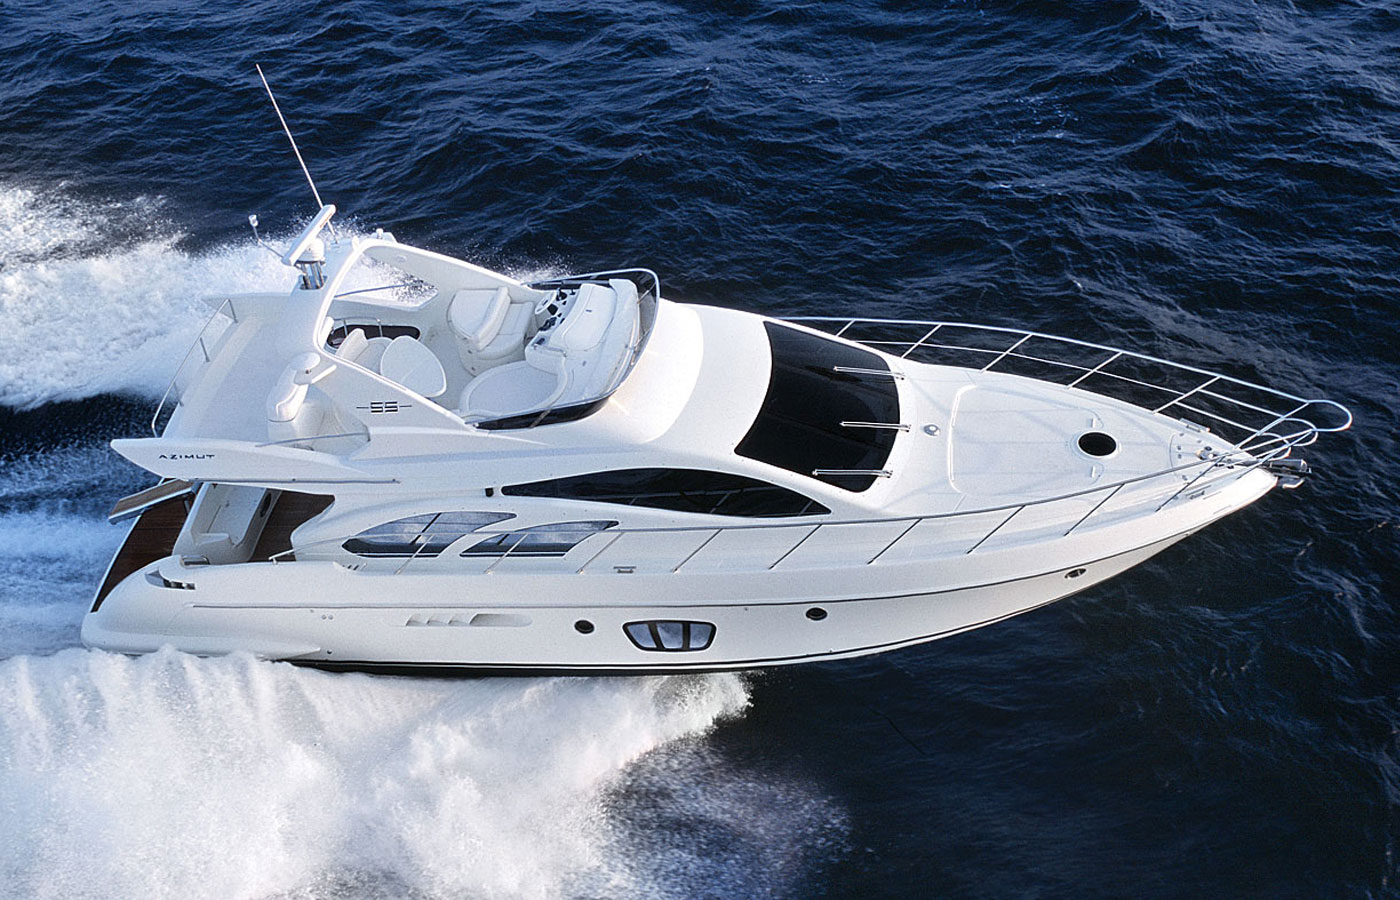 Top 5 Azimut Motoryachts You Can Buy For Under $500K